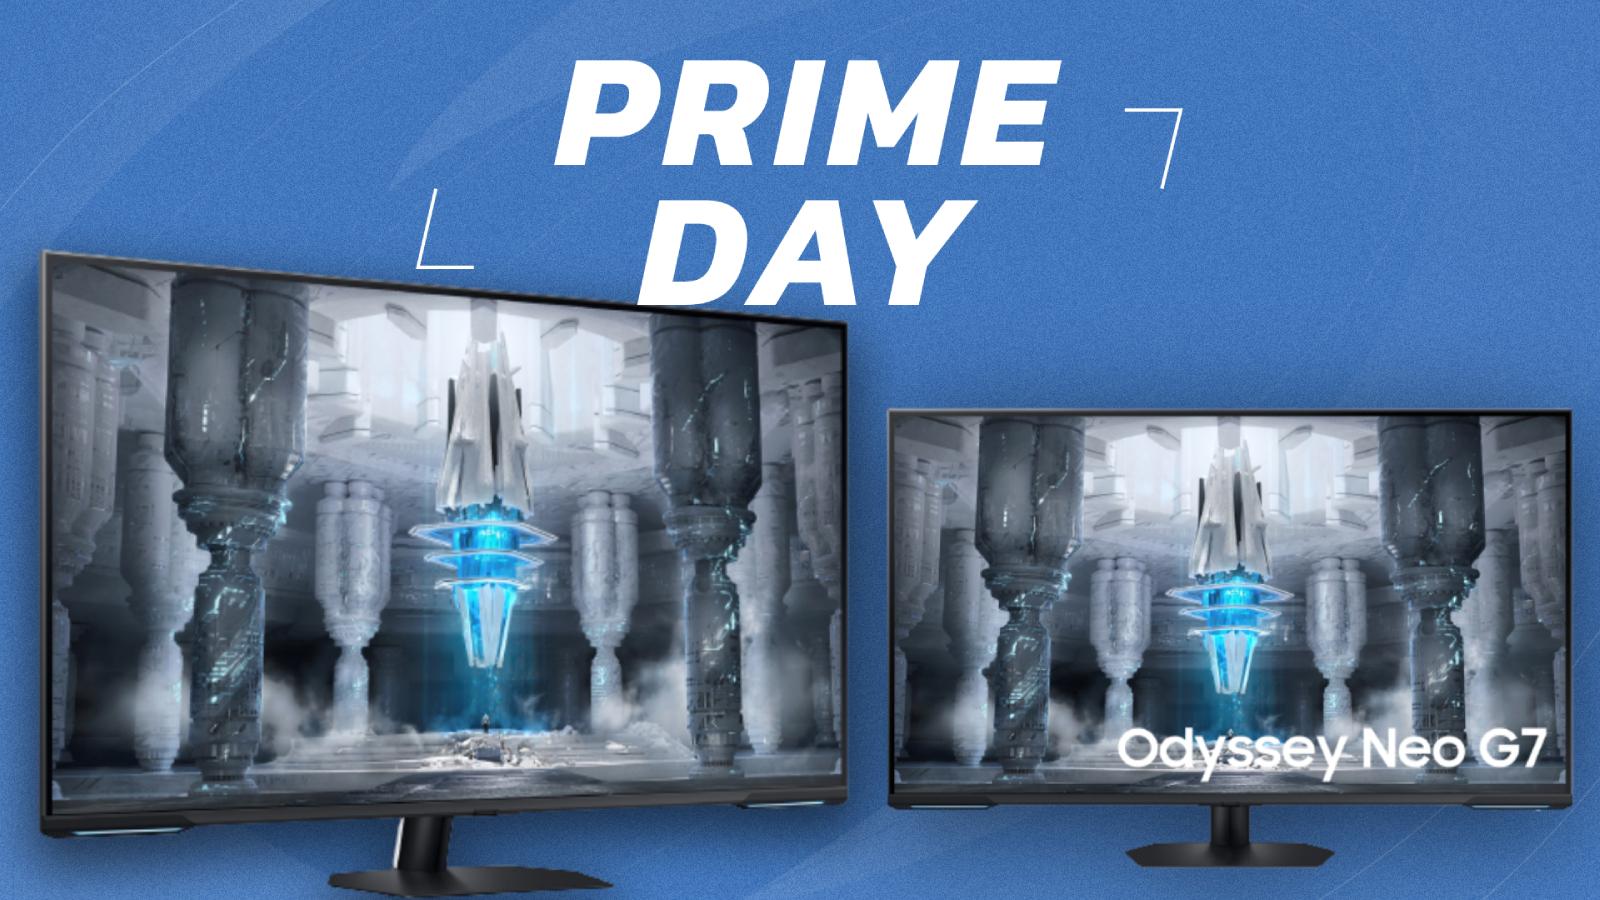 Samsung monitors on Prime Day banner with blue background